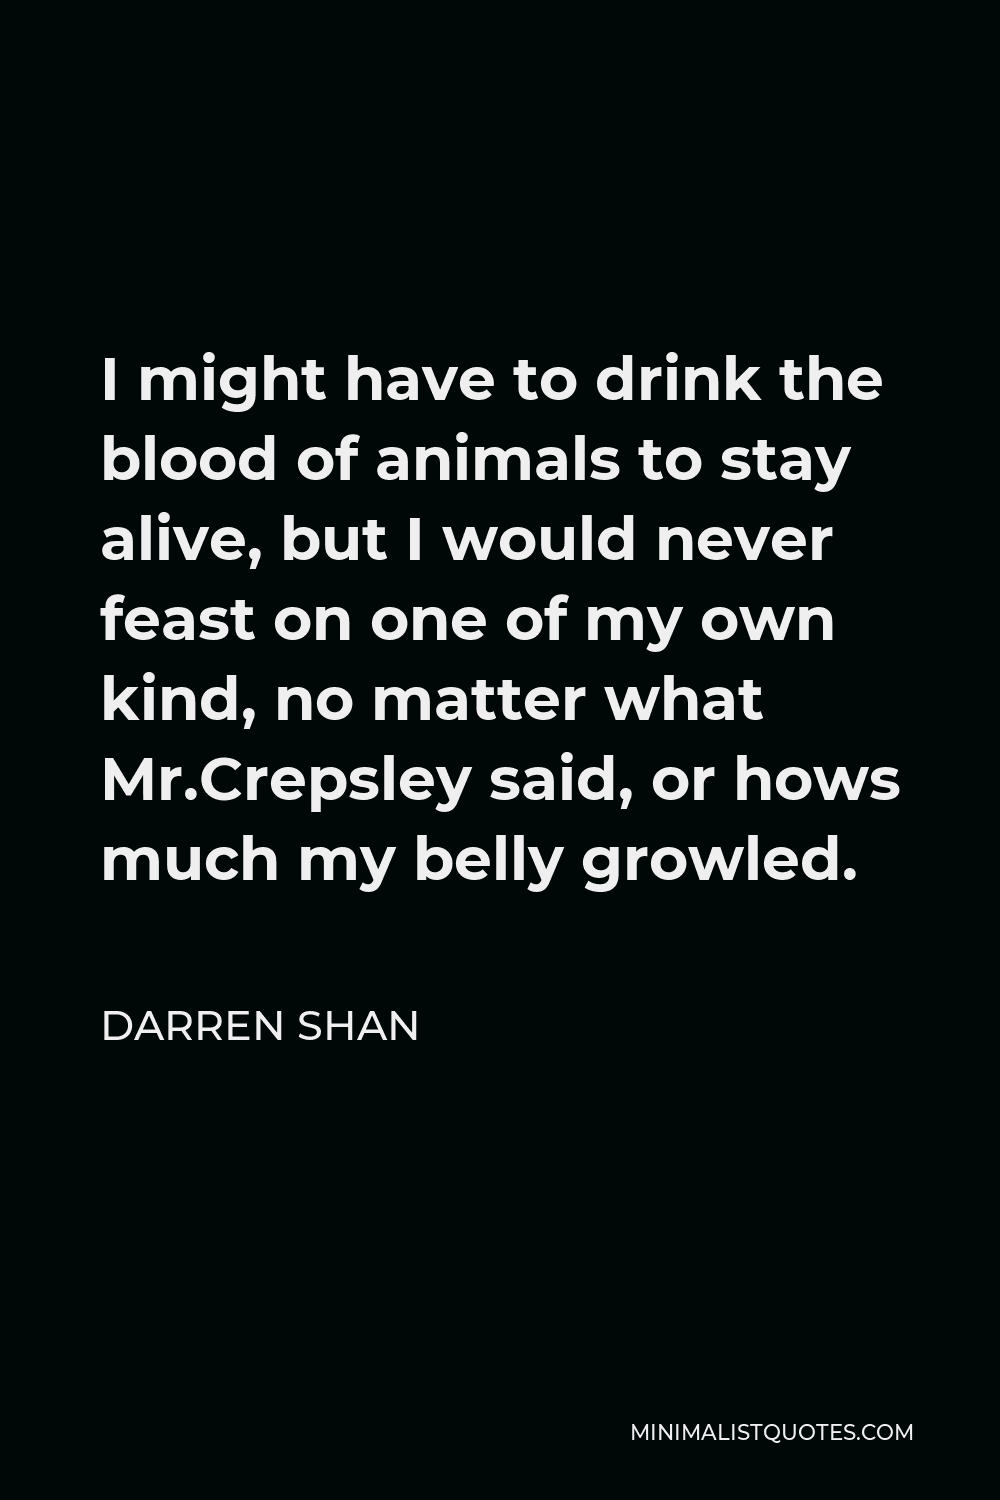 Darren Shan Quote - I might have to drink the blood of animals to stay alive, but I would never feast on one of my own kind, no matter what Mr.Crepsley said, or hows much my belly growled.